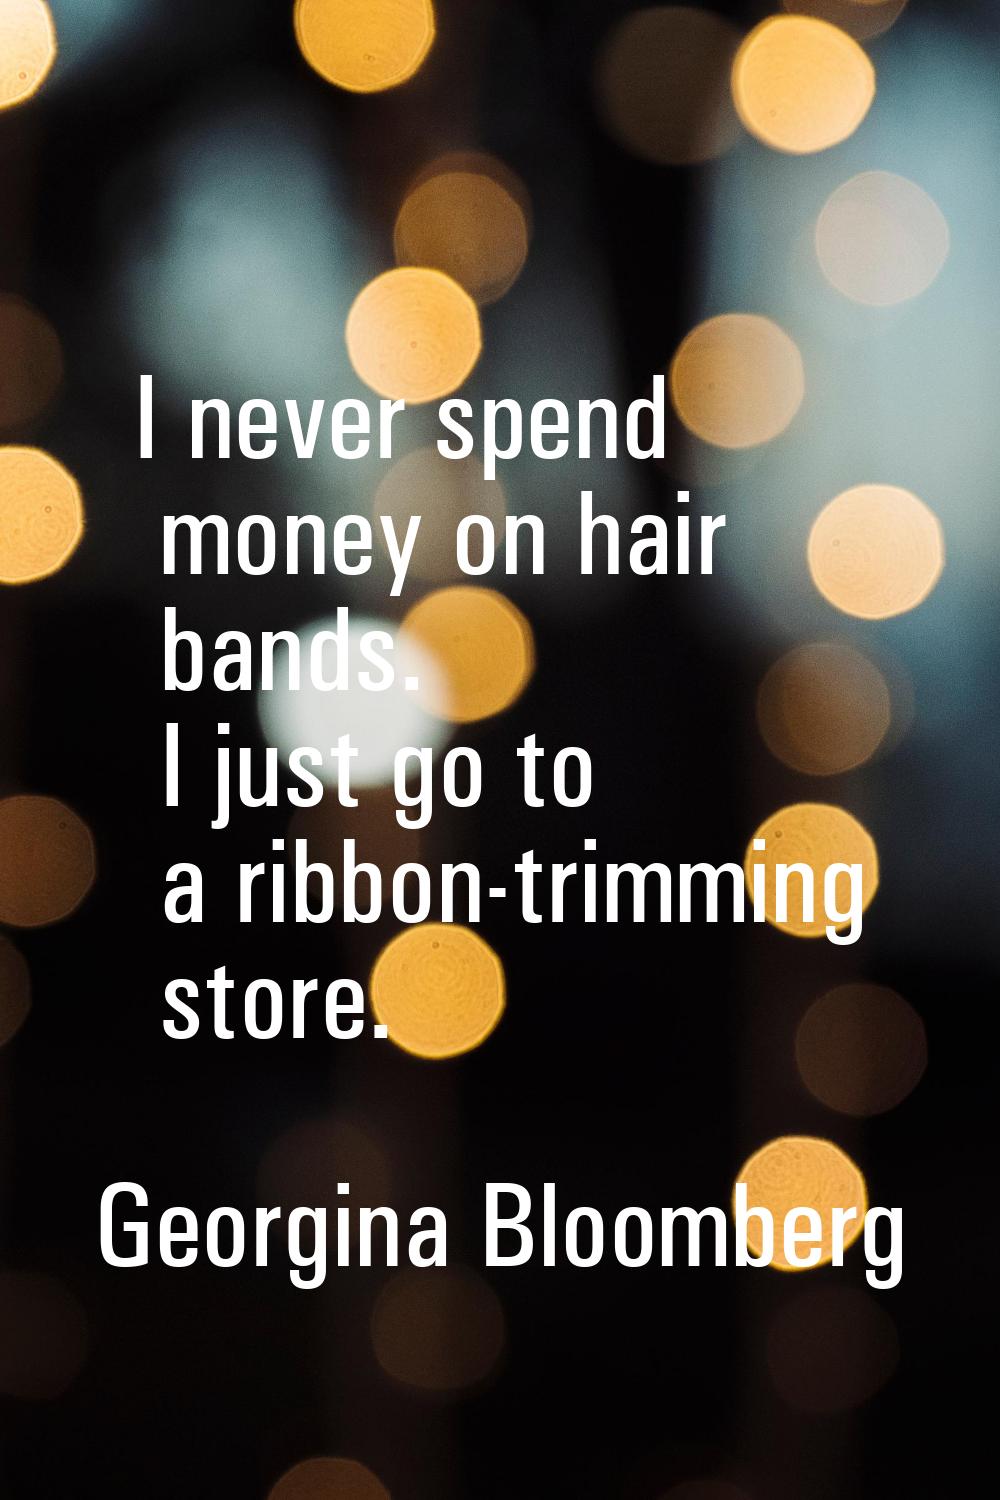 I never spend money on hair bands. I just go to a ribbon-trimming store.